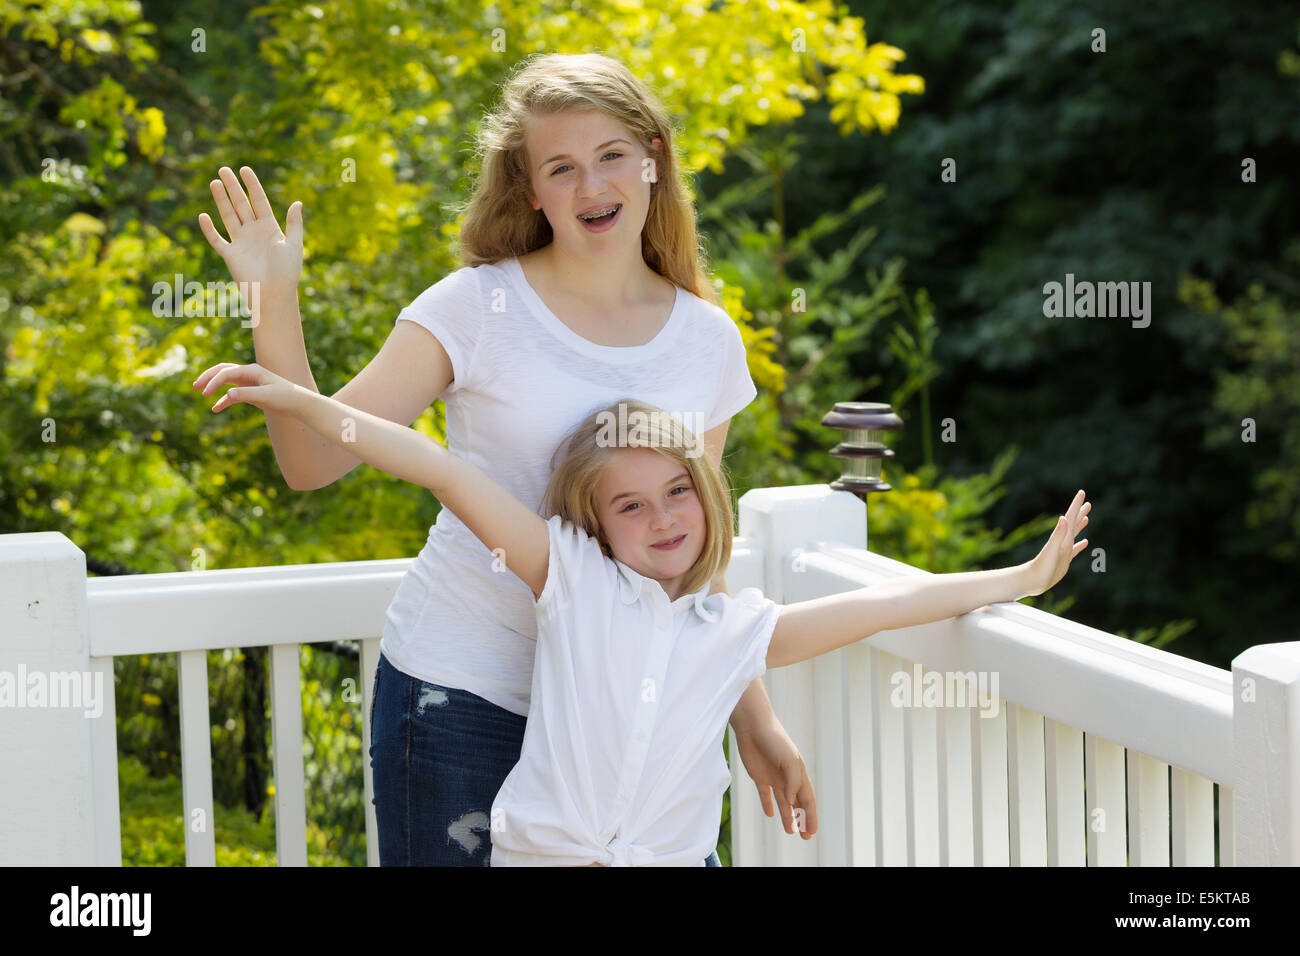 Front view, looking forward, of two sisters waving their arms while outdoors on patio with blurred out trees in background Stock Photo